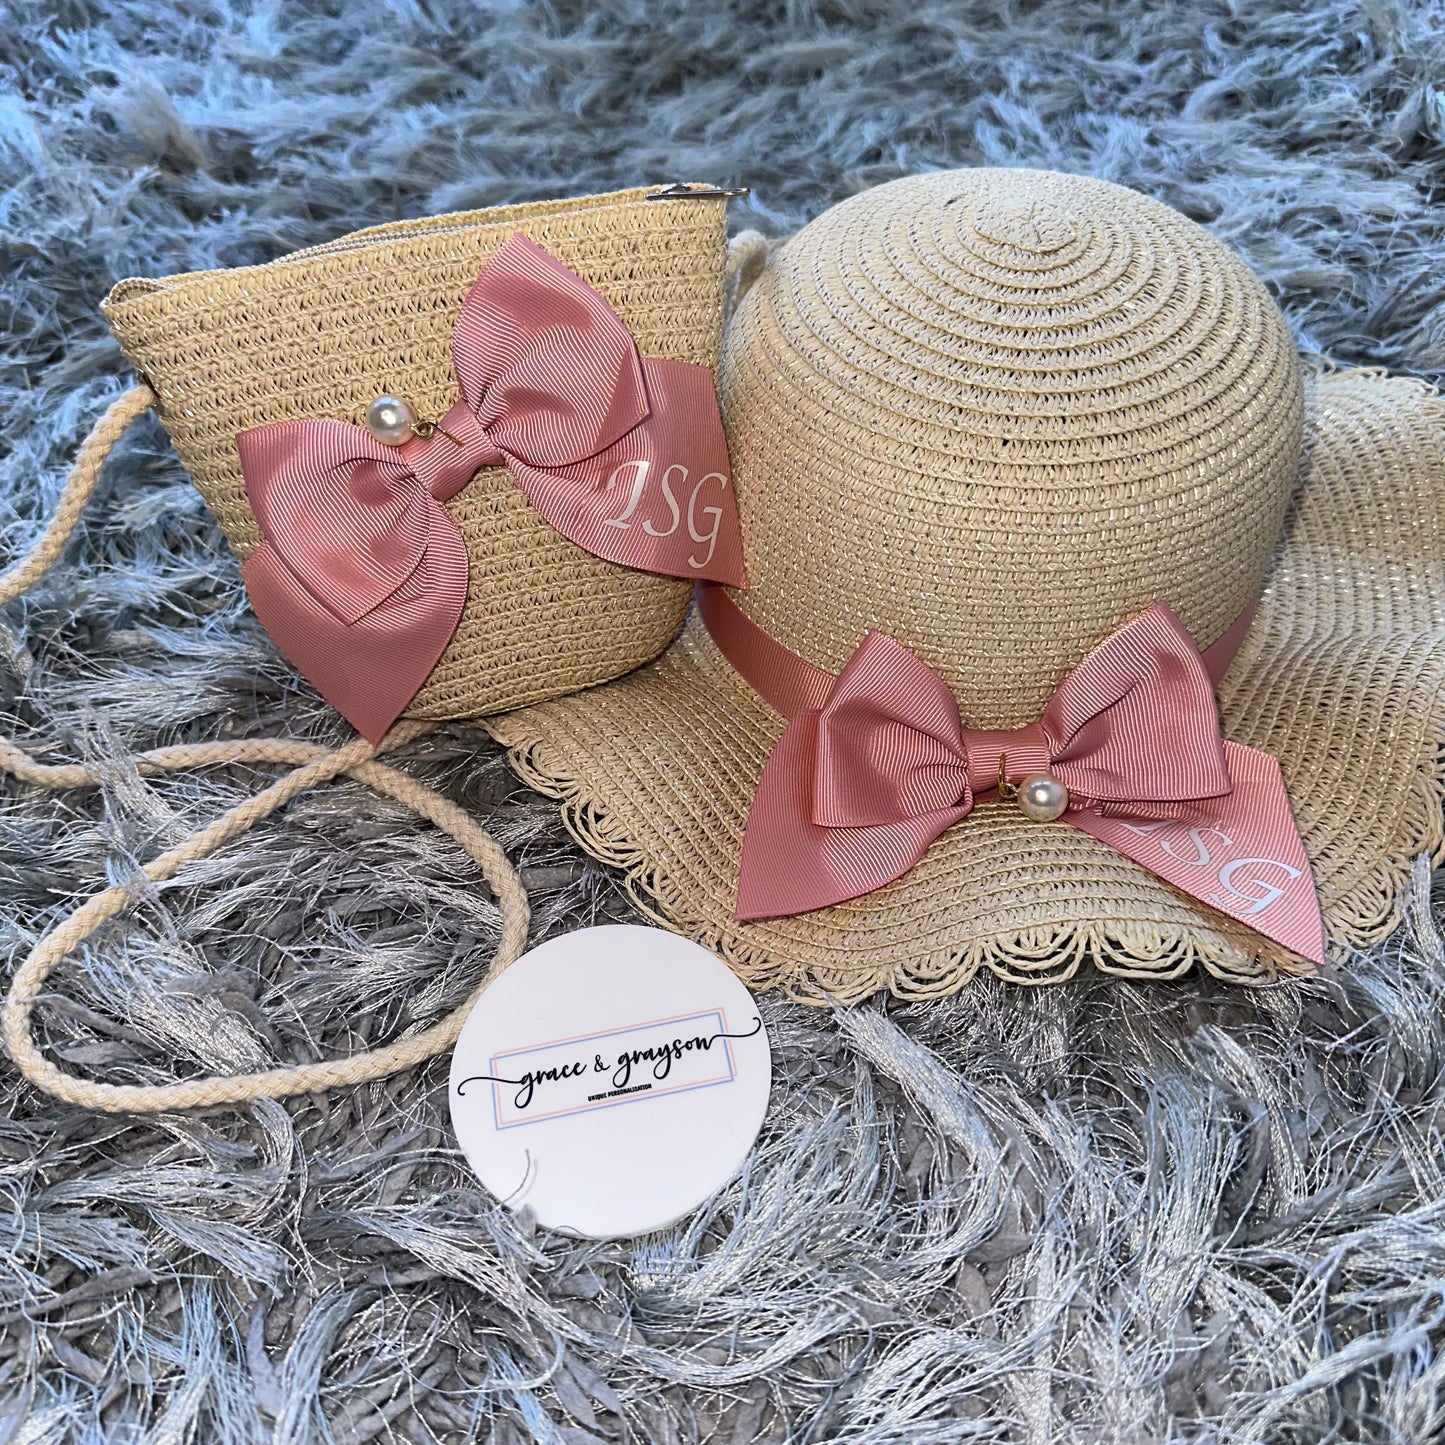 Personalised Pearl & Bow Straw Hat & Bag Set